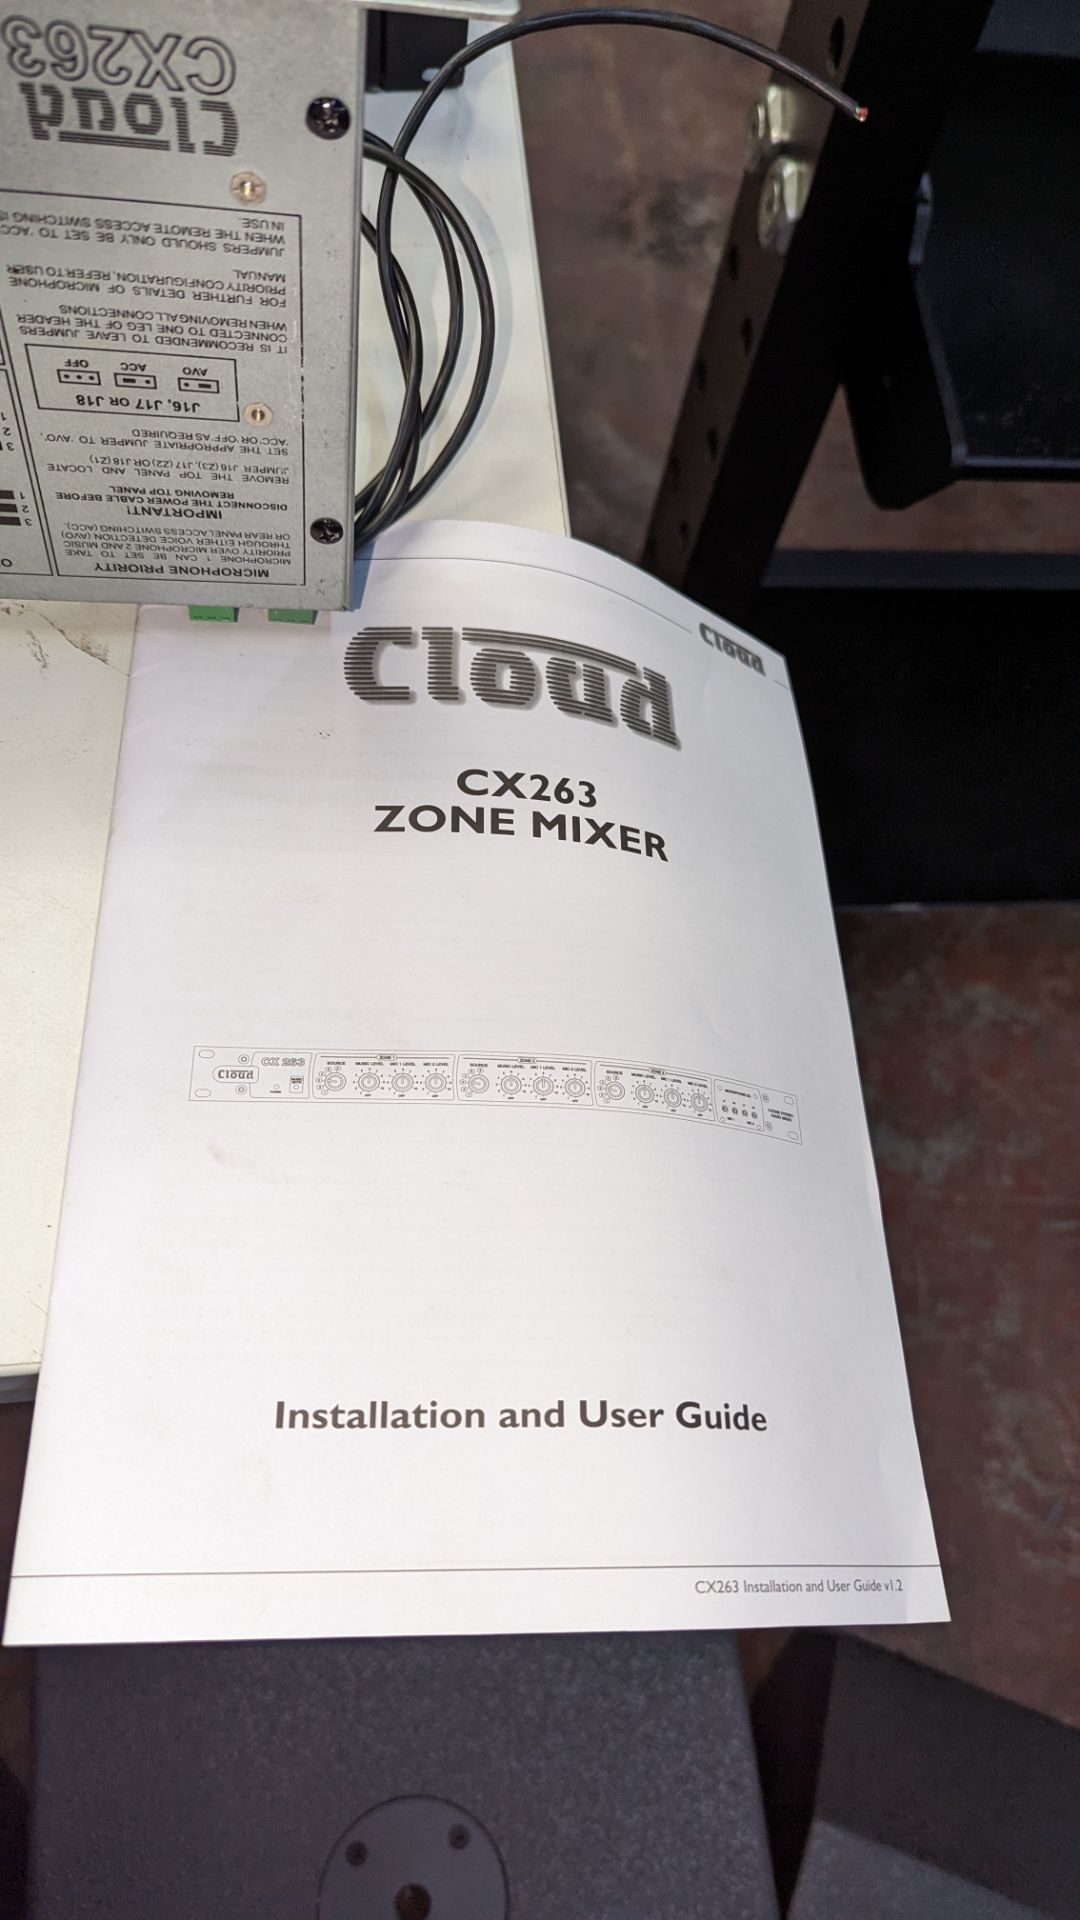 Cloud model CX263 Zone mixer, including installation and user guide, power cable and rack mounting f - Image 13 of 13